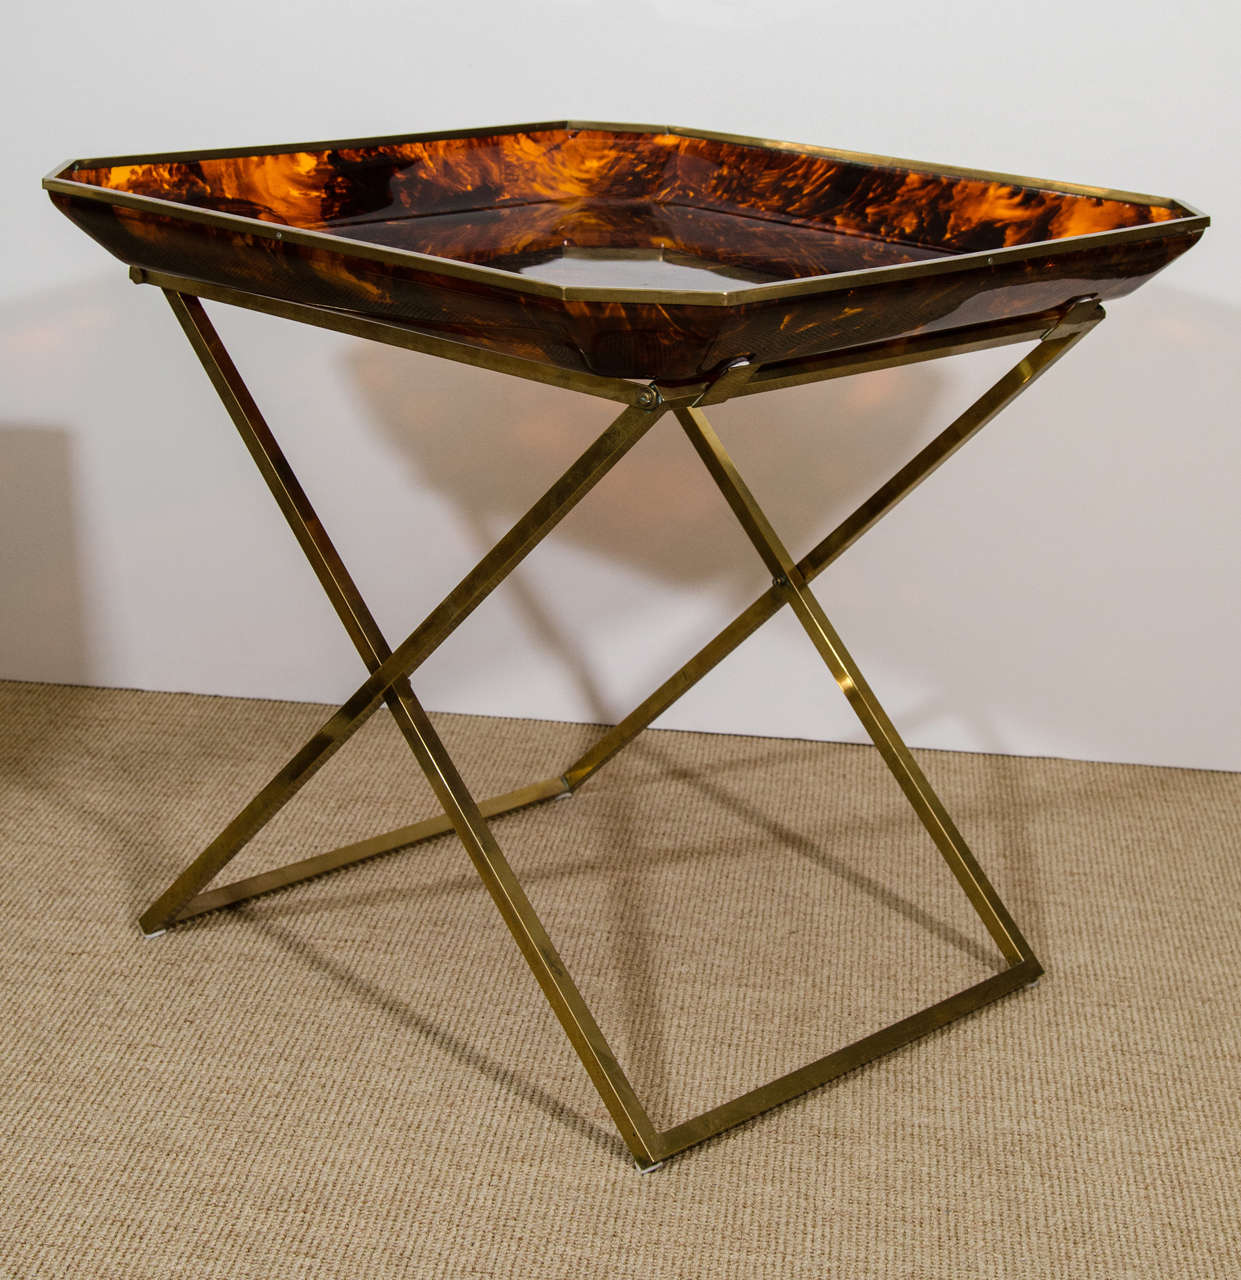 Tortoise plexiglass tray table with a brass "X" base.

Designed by Monique Roger and Vincent Jacquard of 'Archea-Milano', 1970. 

Sold at select boutiques in the 1970s: Christian Dior, Ave. Montaigne, David Hicks, Paris, and Khazen